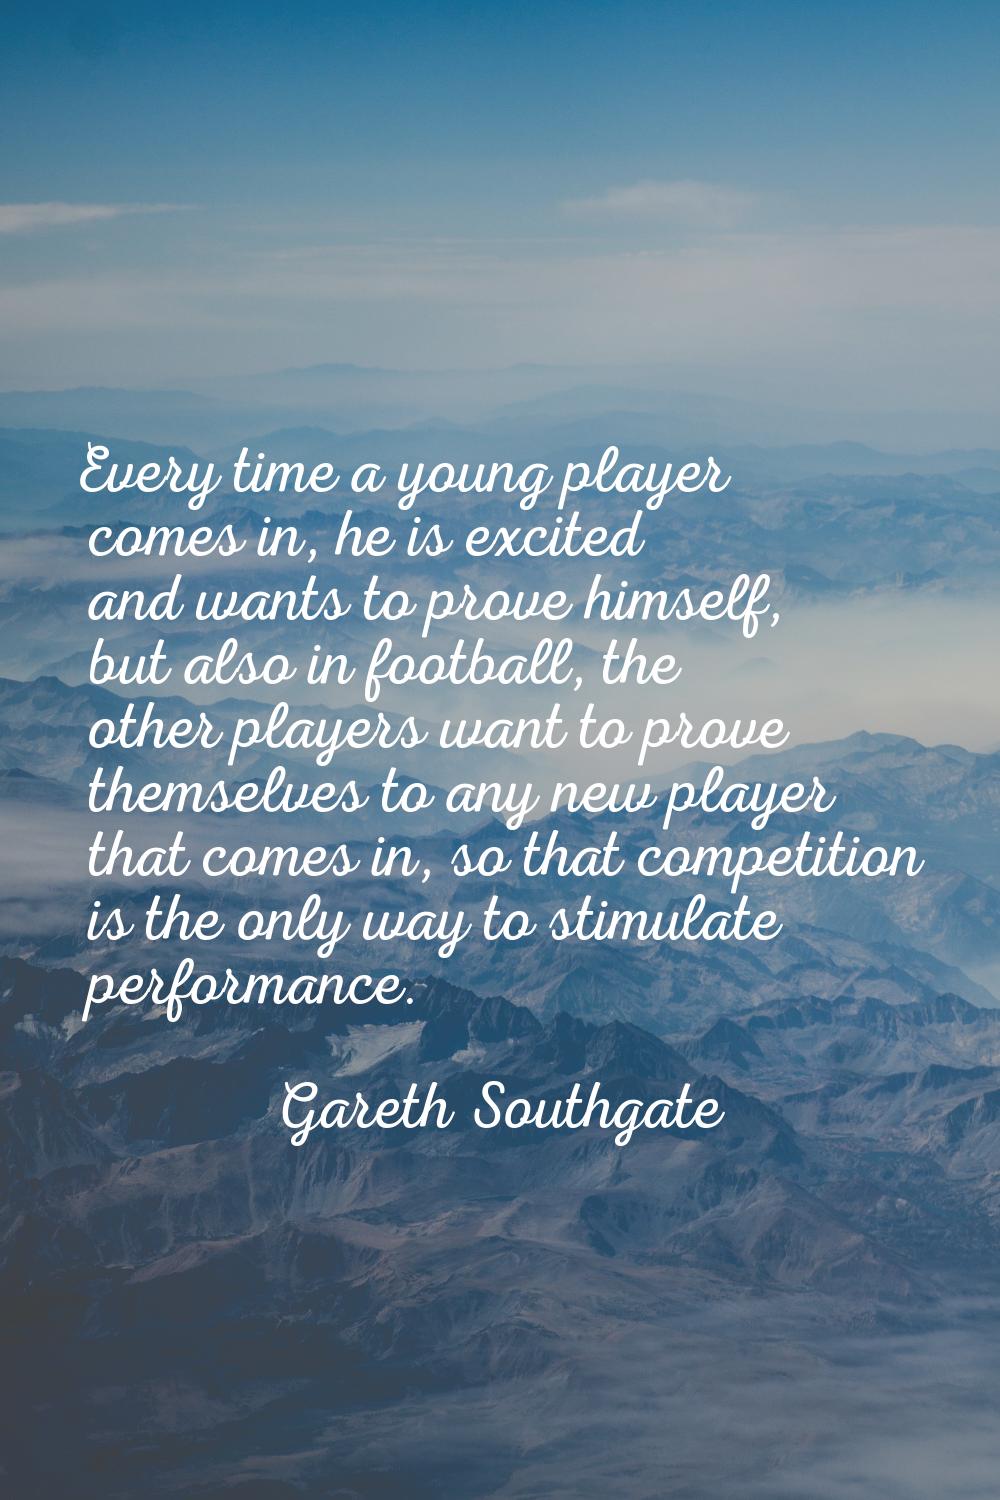 Every time a young player comes in, he is excited and wants to prove himself, but also in football,